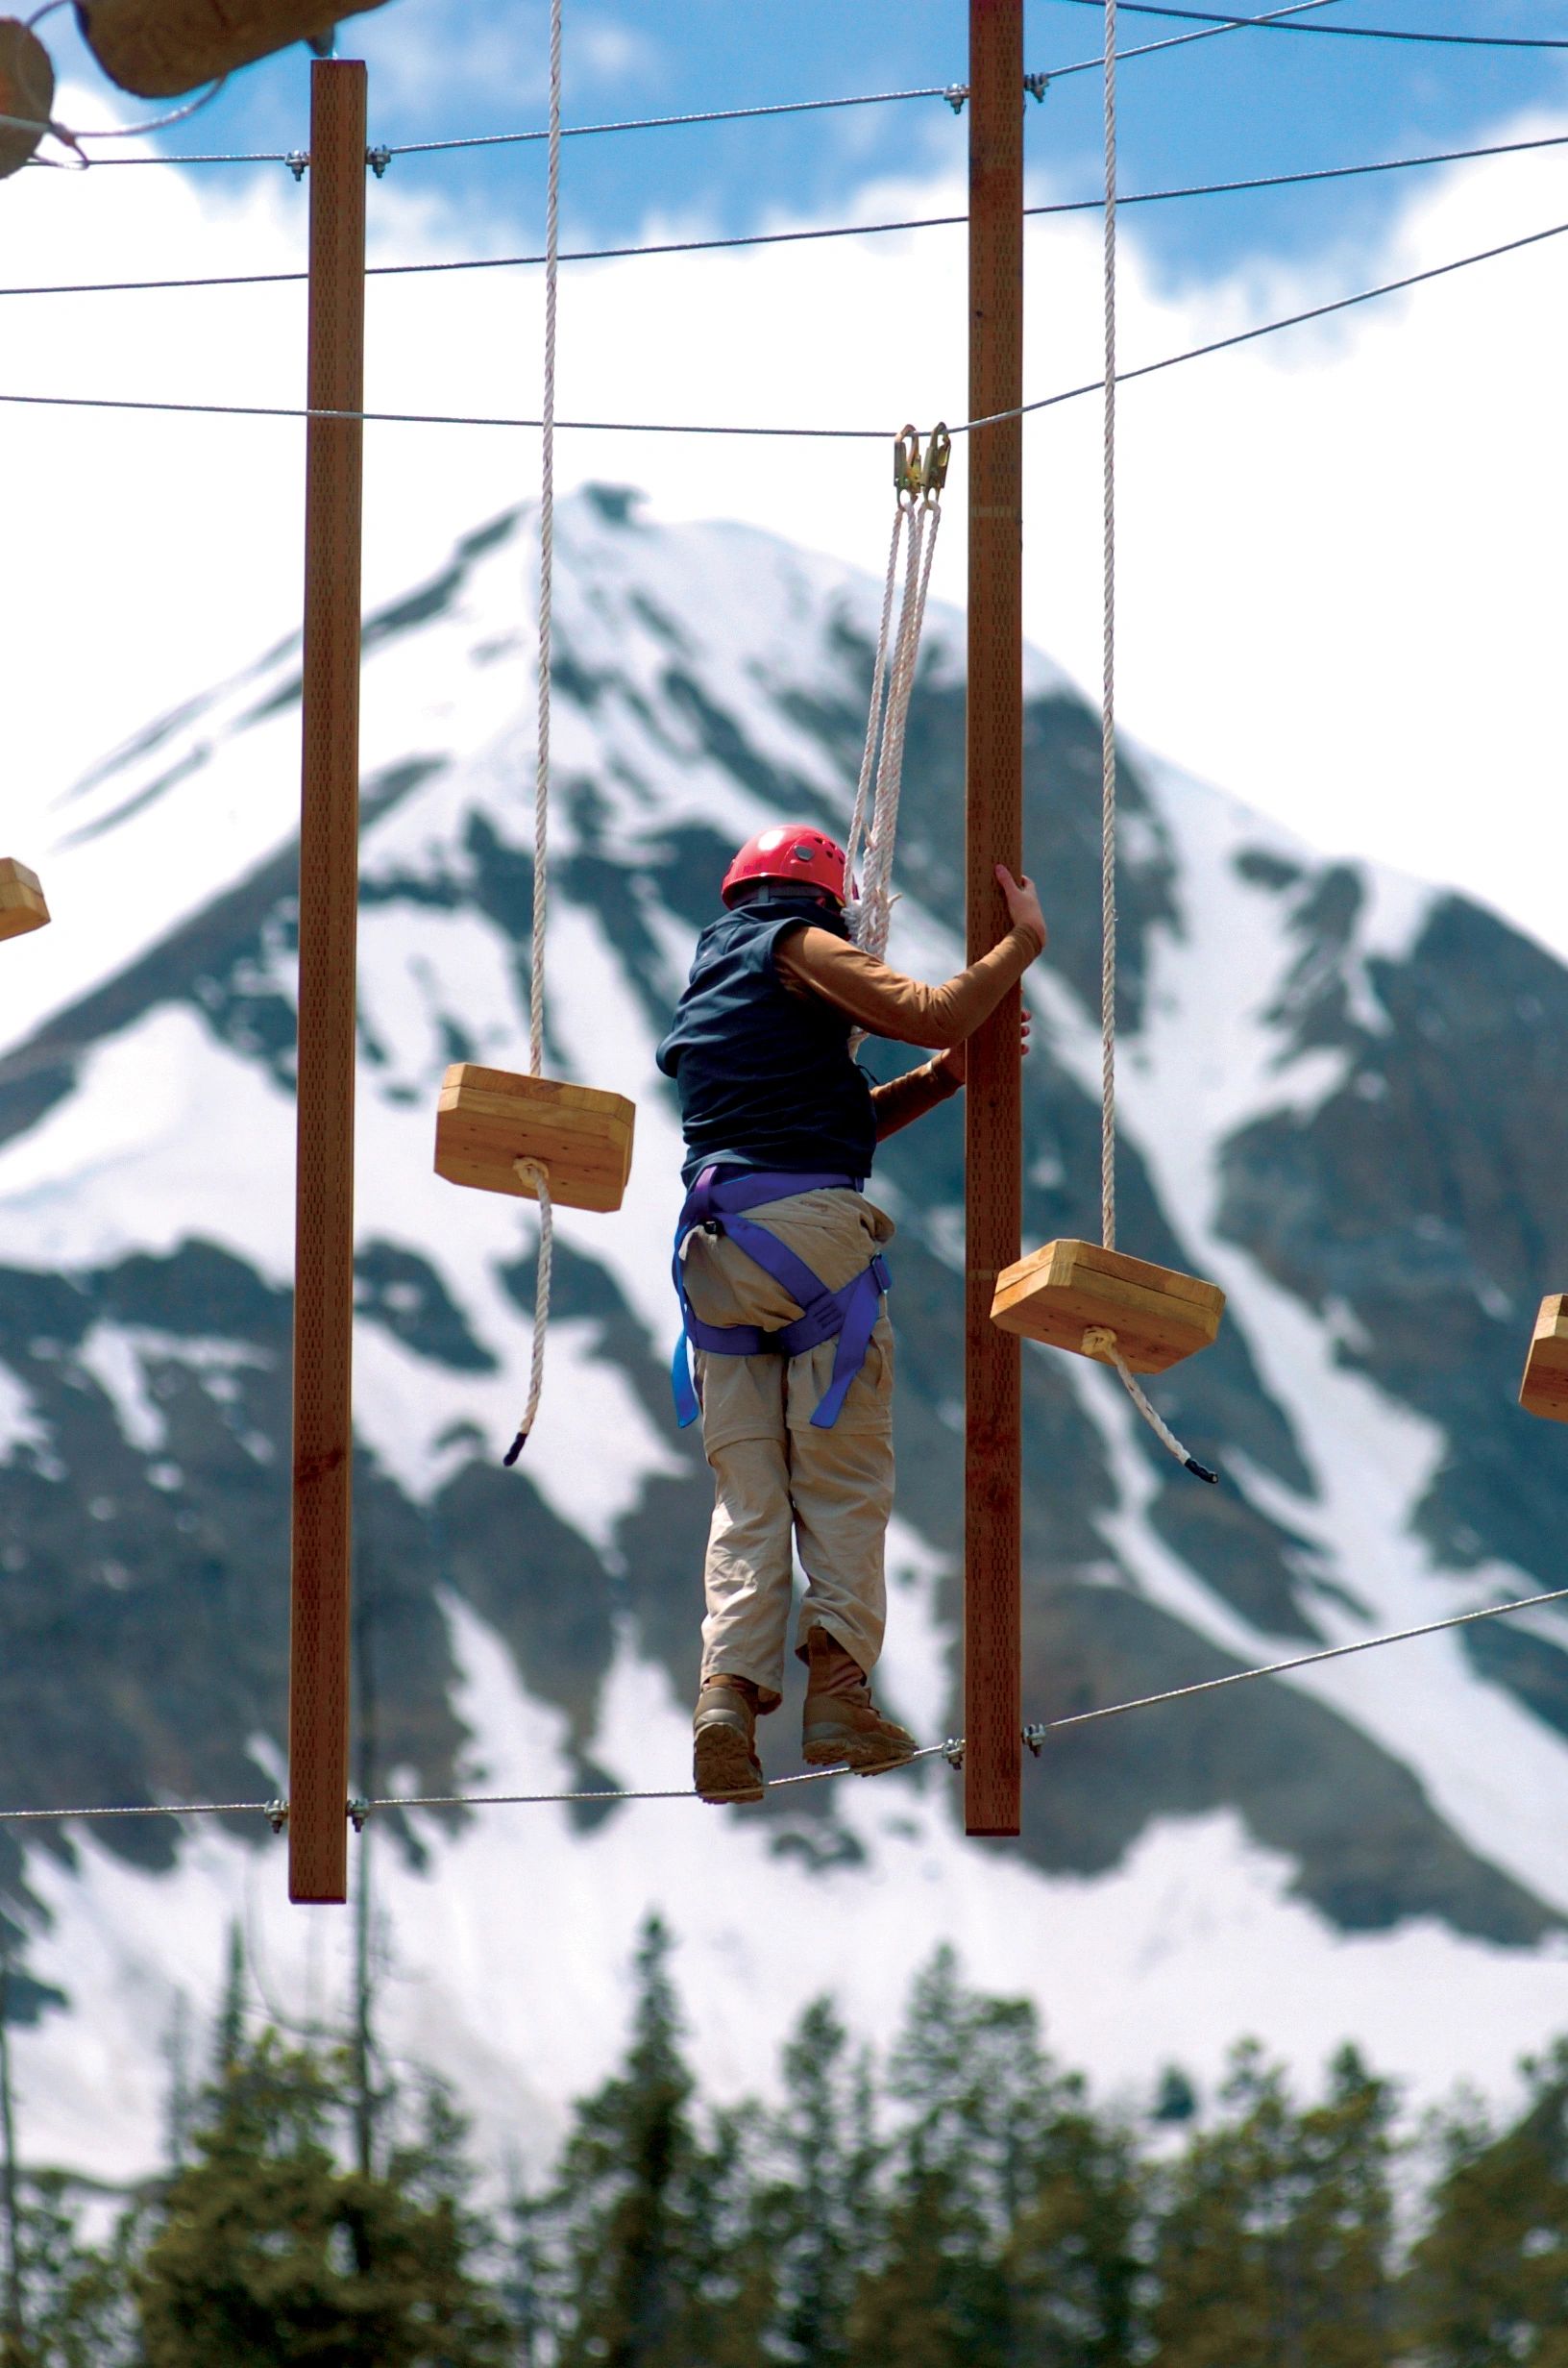 Participant on ski resort high ropes course